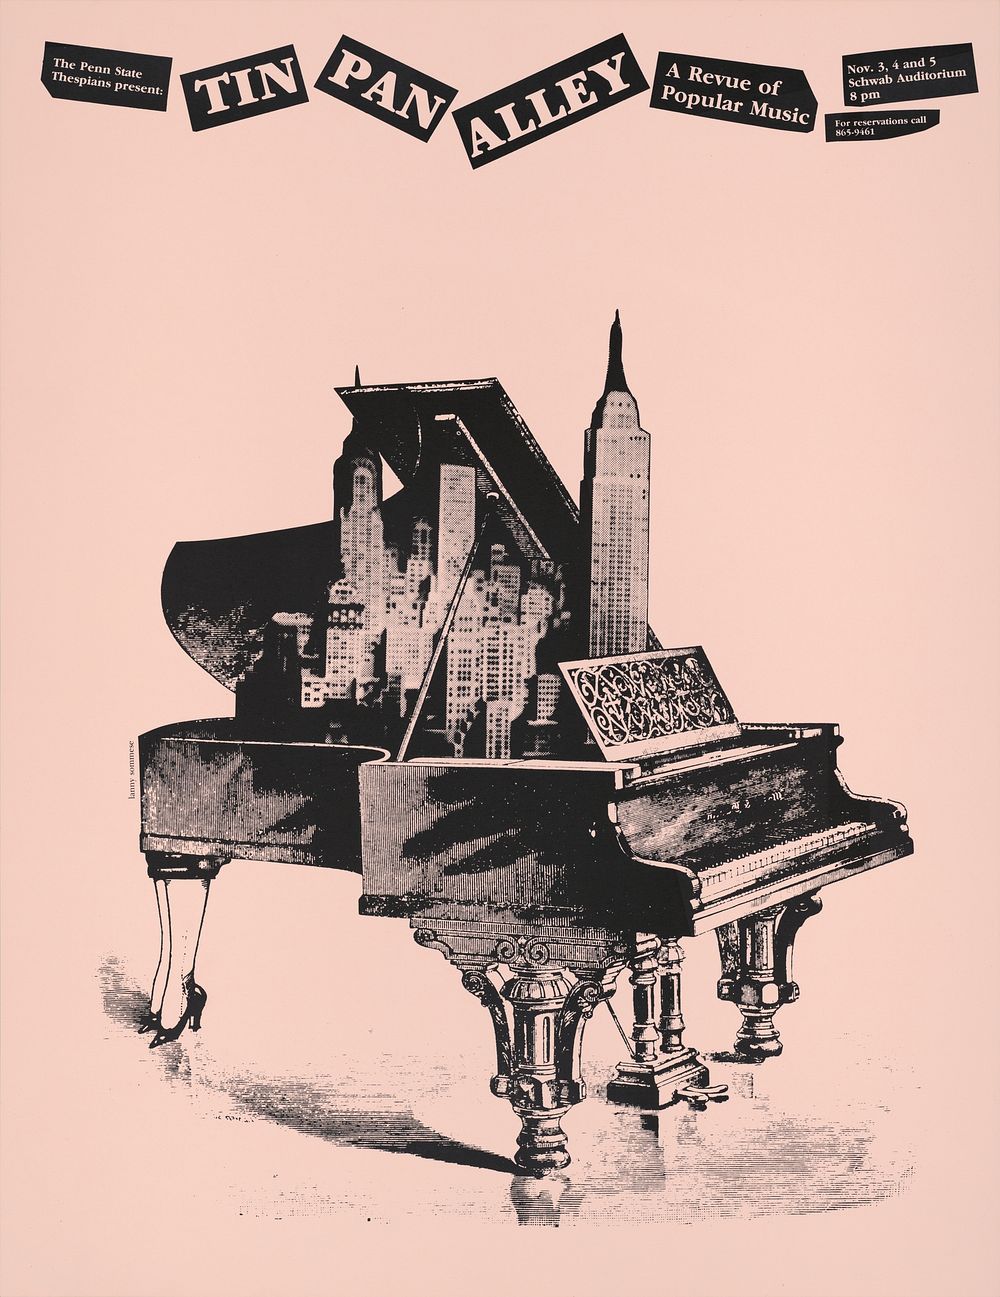 Tin pan alley - a revue of popular music (1980) poster by Lanny Sommese. Original public domain image from the Library of…